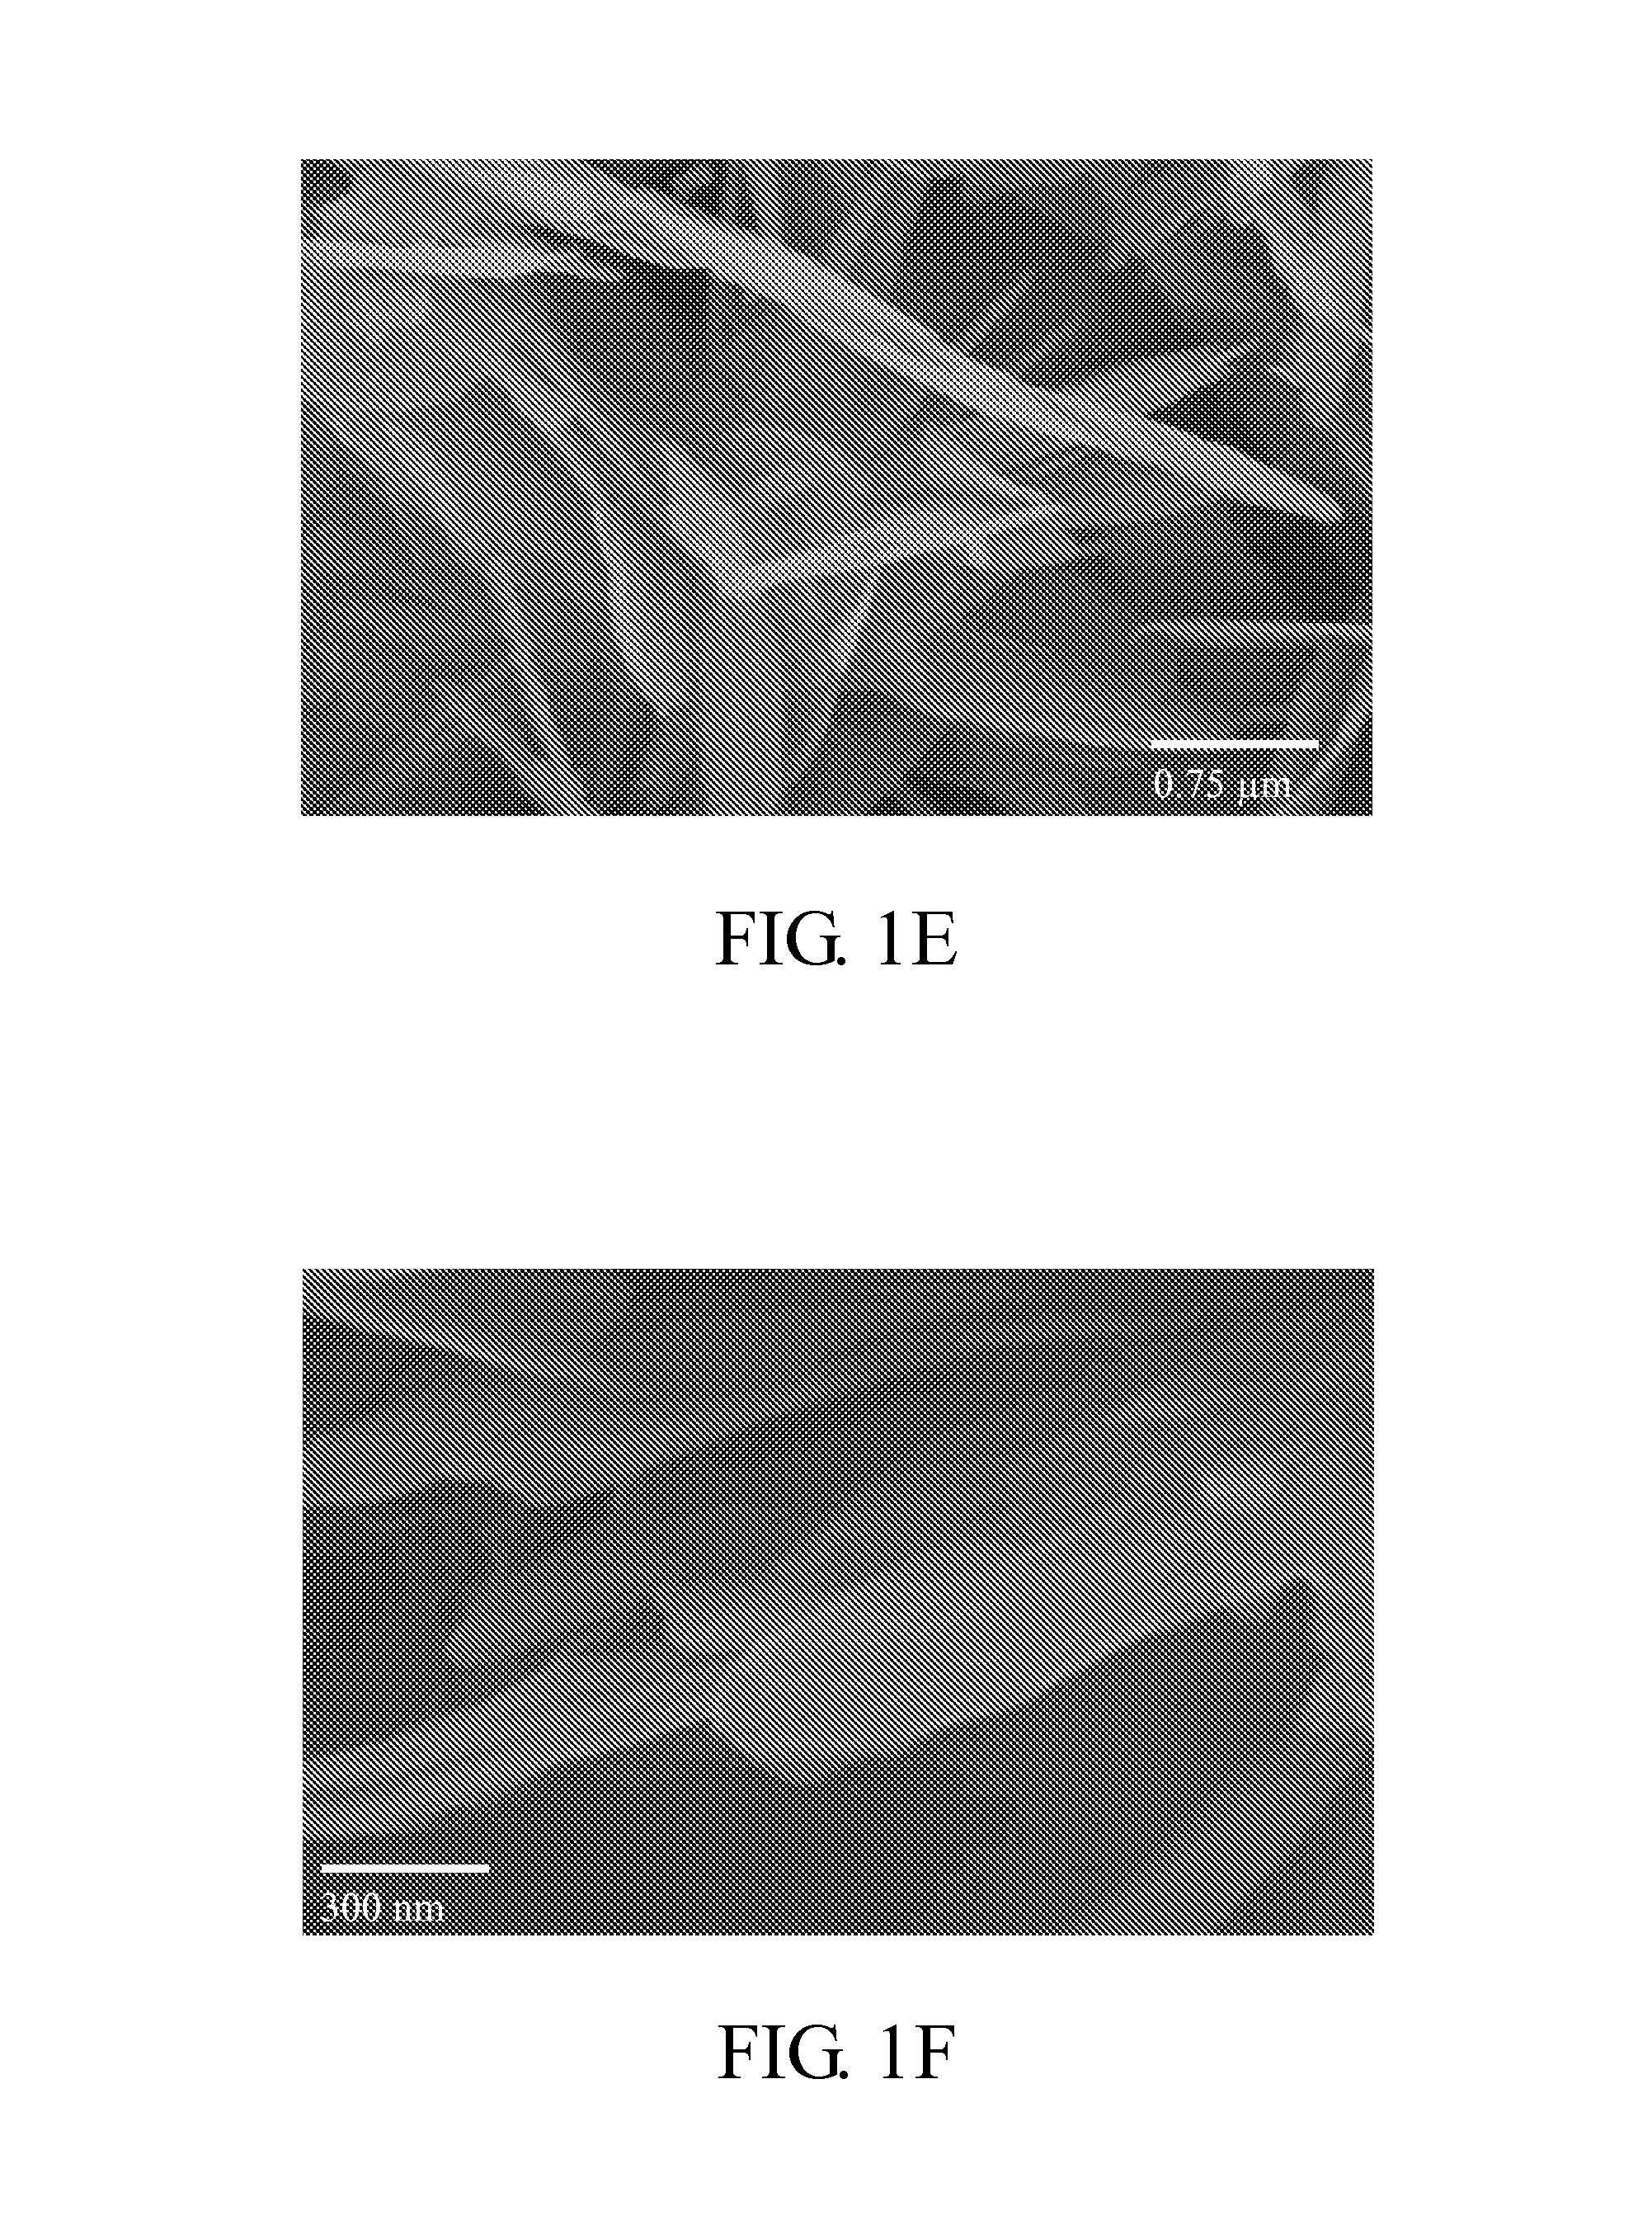 Ferrous phosphate powders, lithium iron phosphate powders for li-ion battery, and methods for manufacturing the same